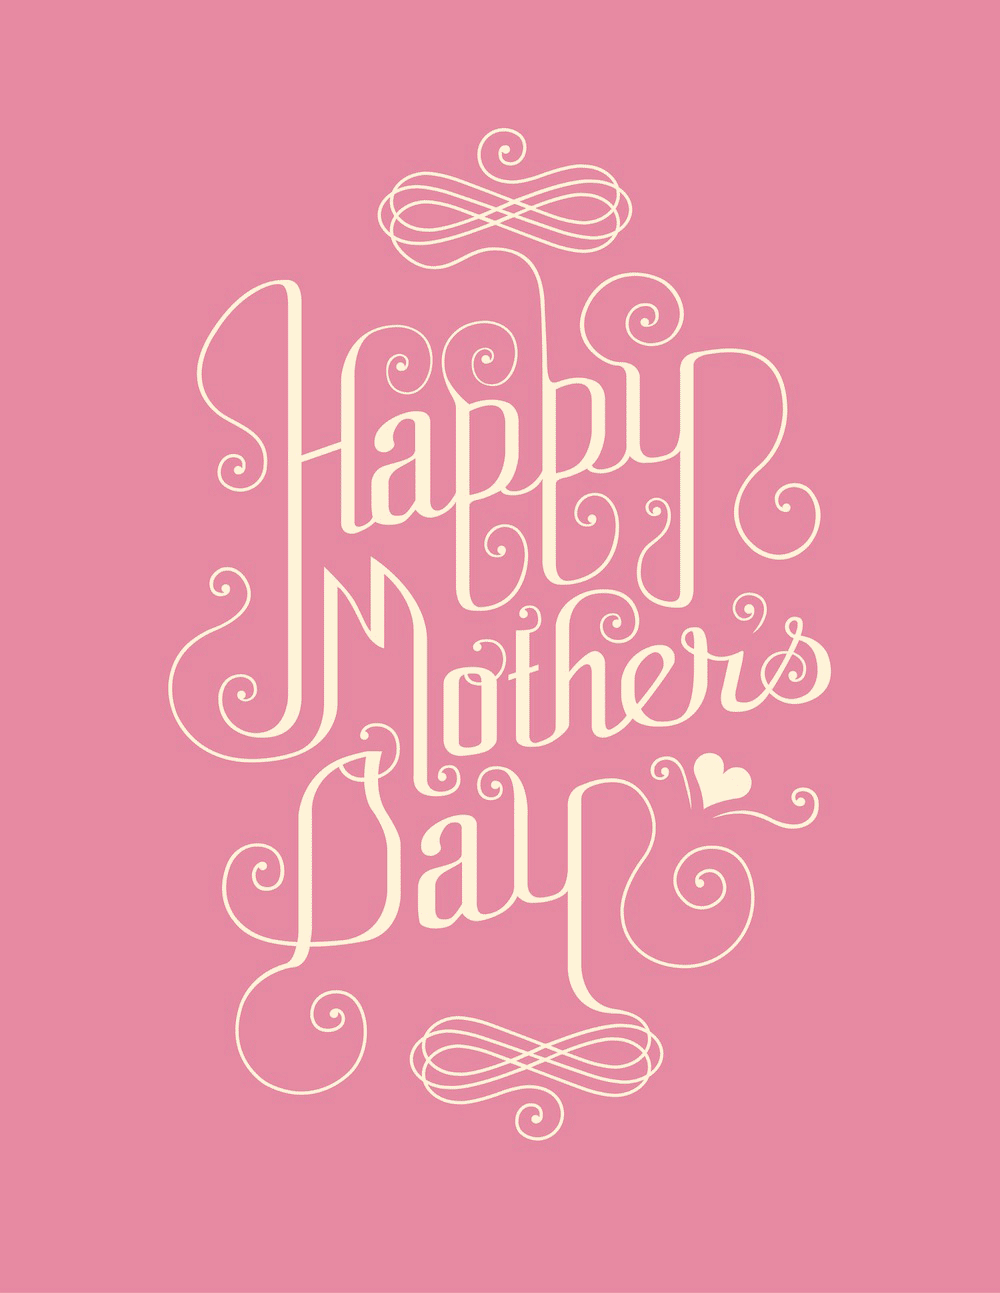 Download 30+ Free Printable Vector & PSD Happy Mother's Day Cards 2014